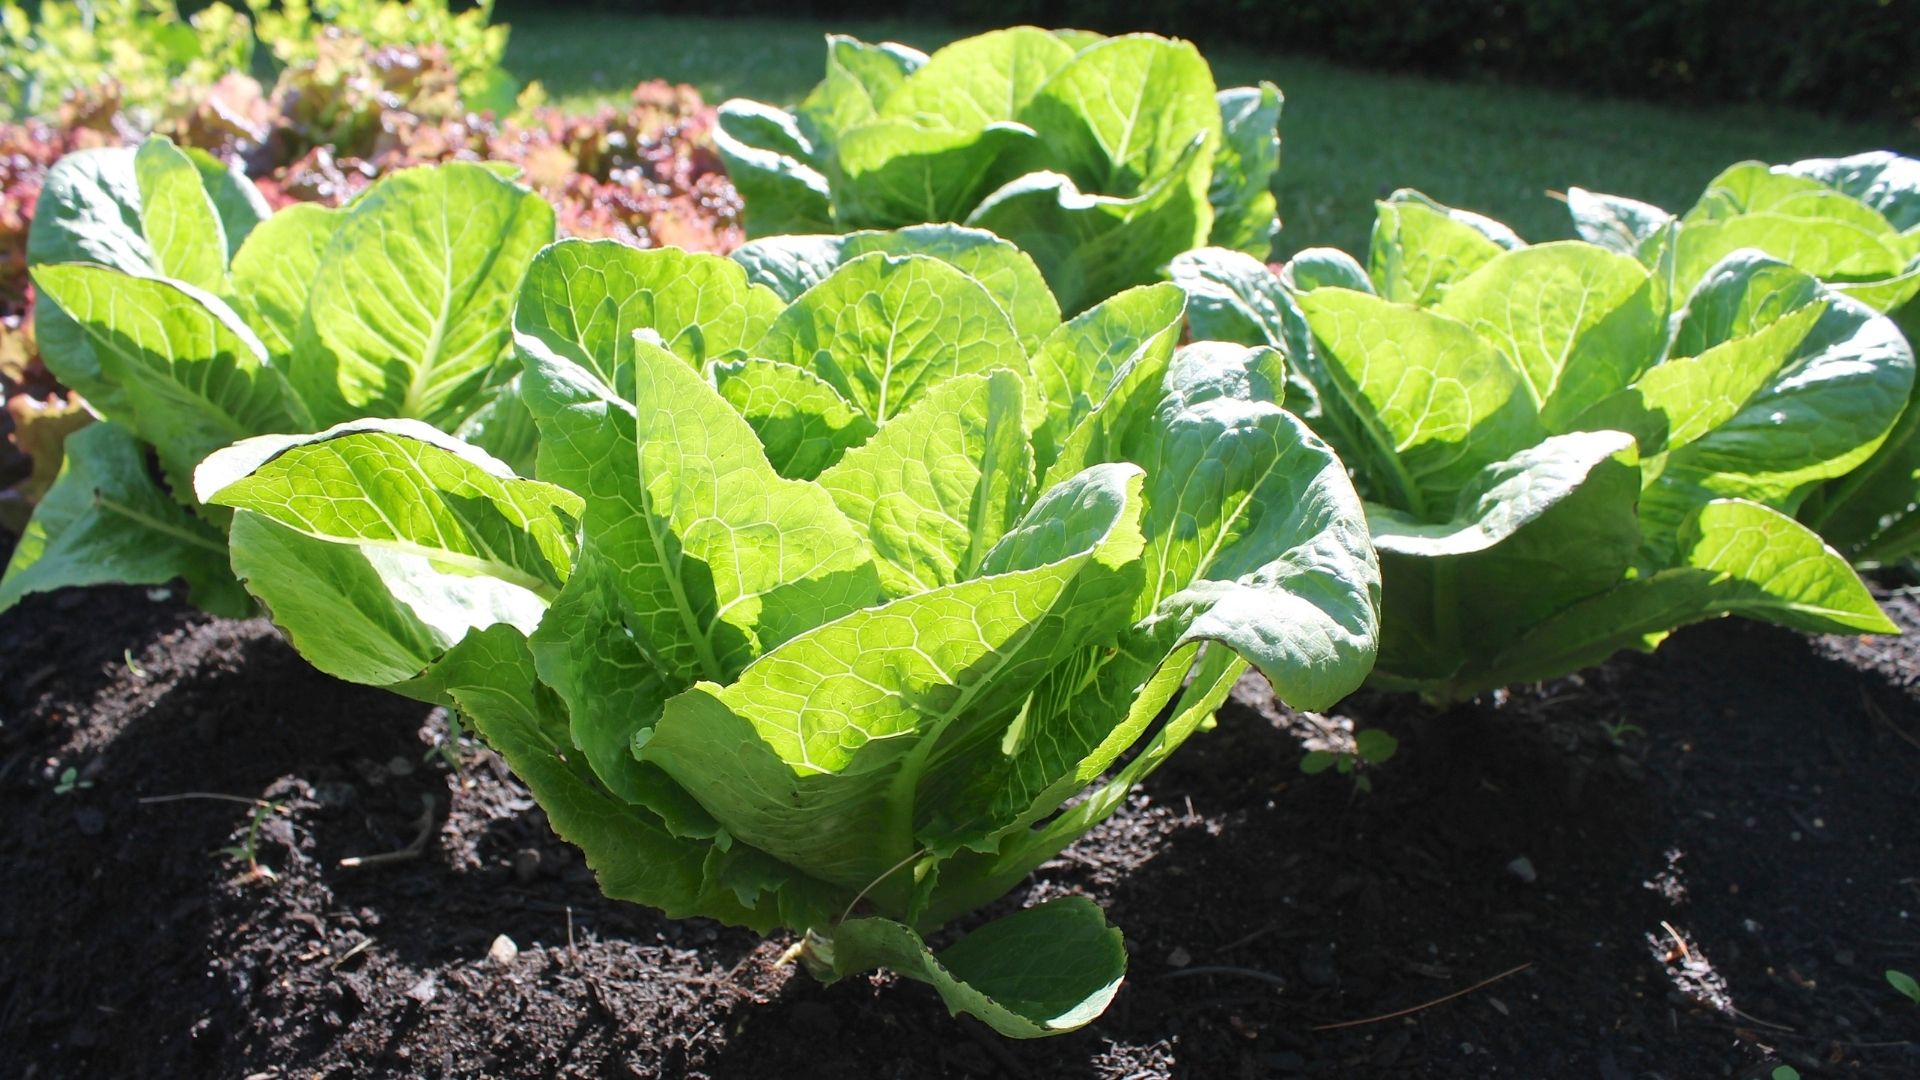 Overview of Leafy Green Pests